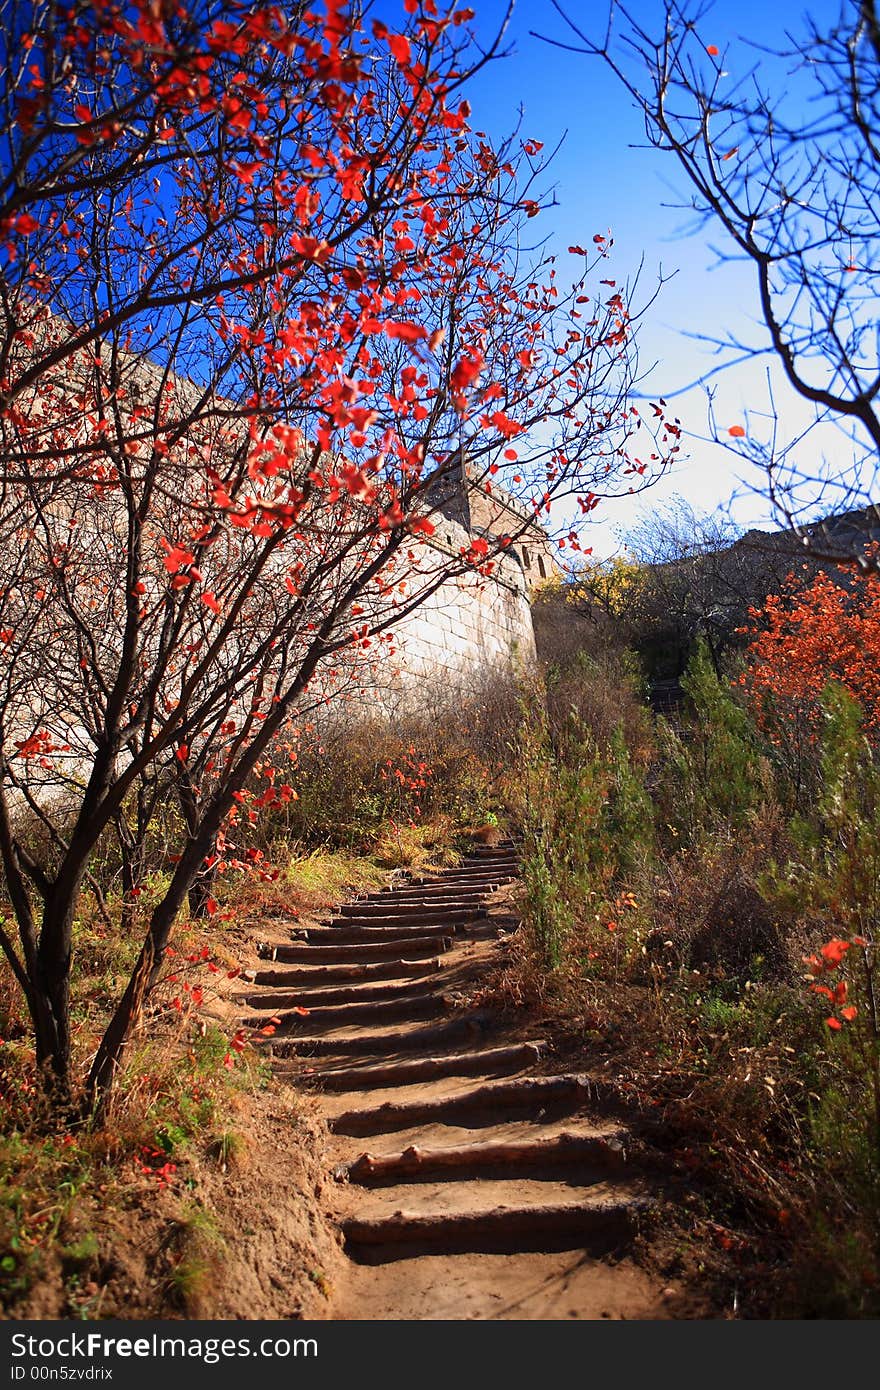 The relic of the Great Wall, the scaled path leading to it, the red autumn trees, construct a beautiful seasonal senery. The relic of the Great Wall, the scaled path leading to it, the red autumn trees, construct a beautiful seasonal senery.